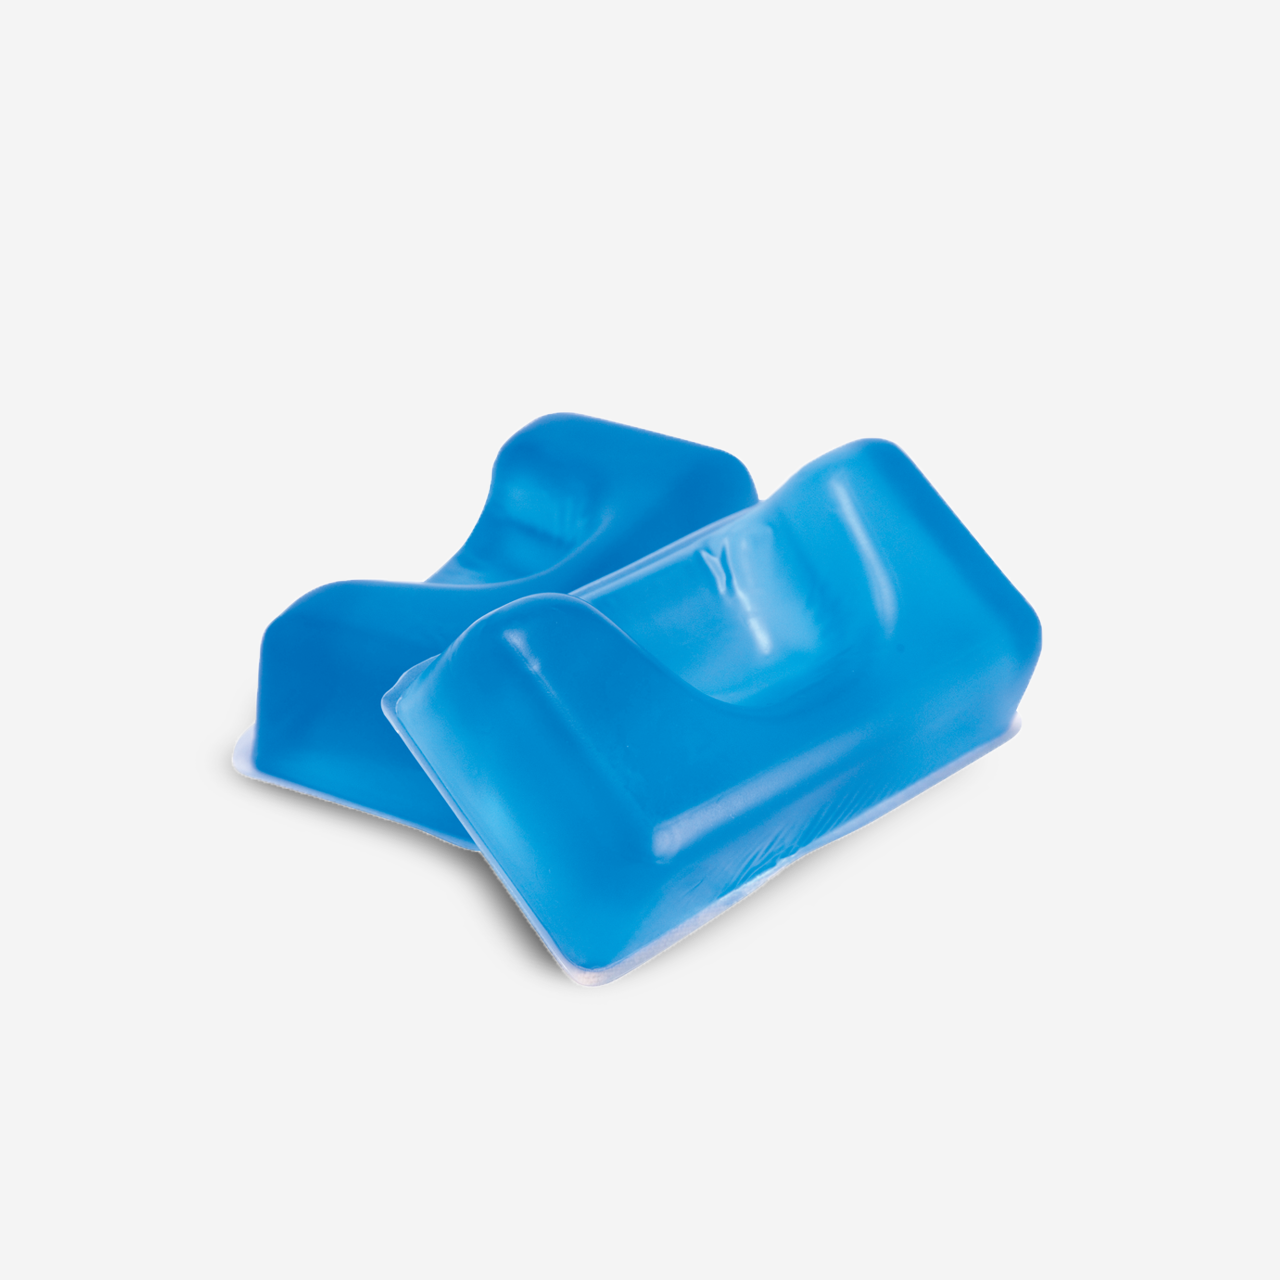 Gel Positioning Pad Surgery Polyurethane Molded Products